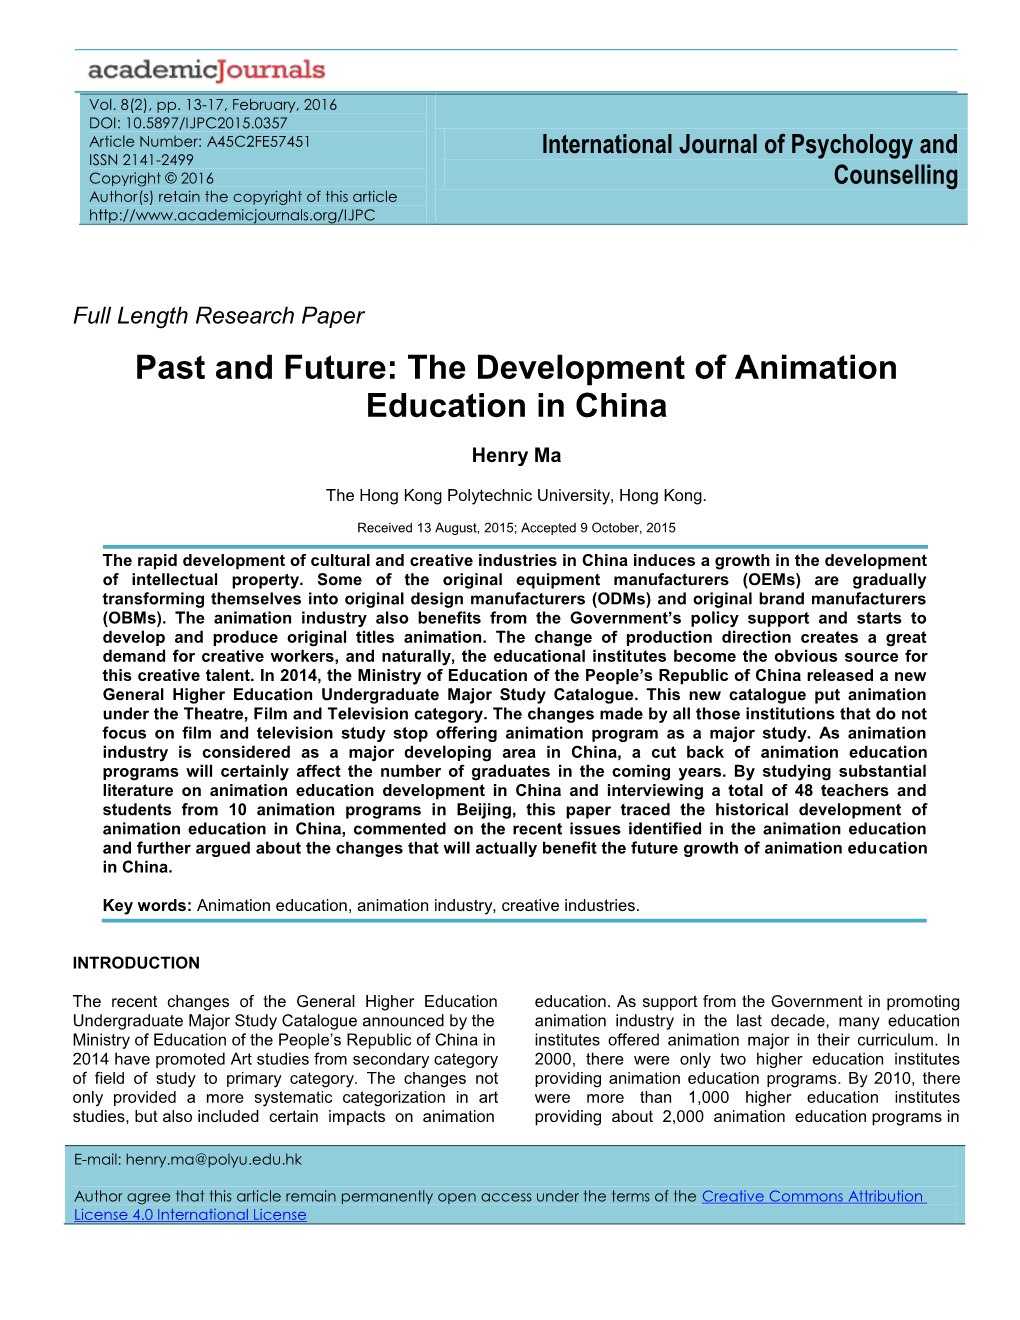 Past and Future: the Development of Animation Education in China